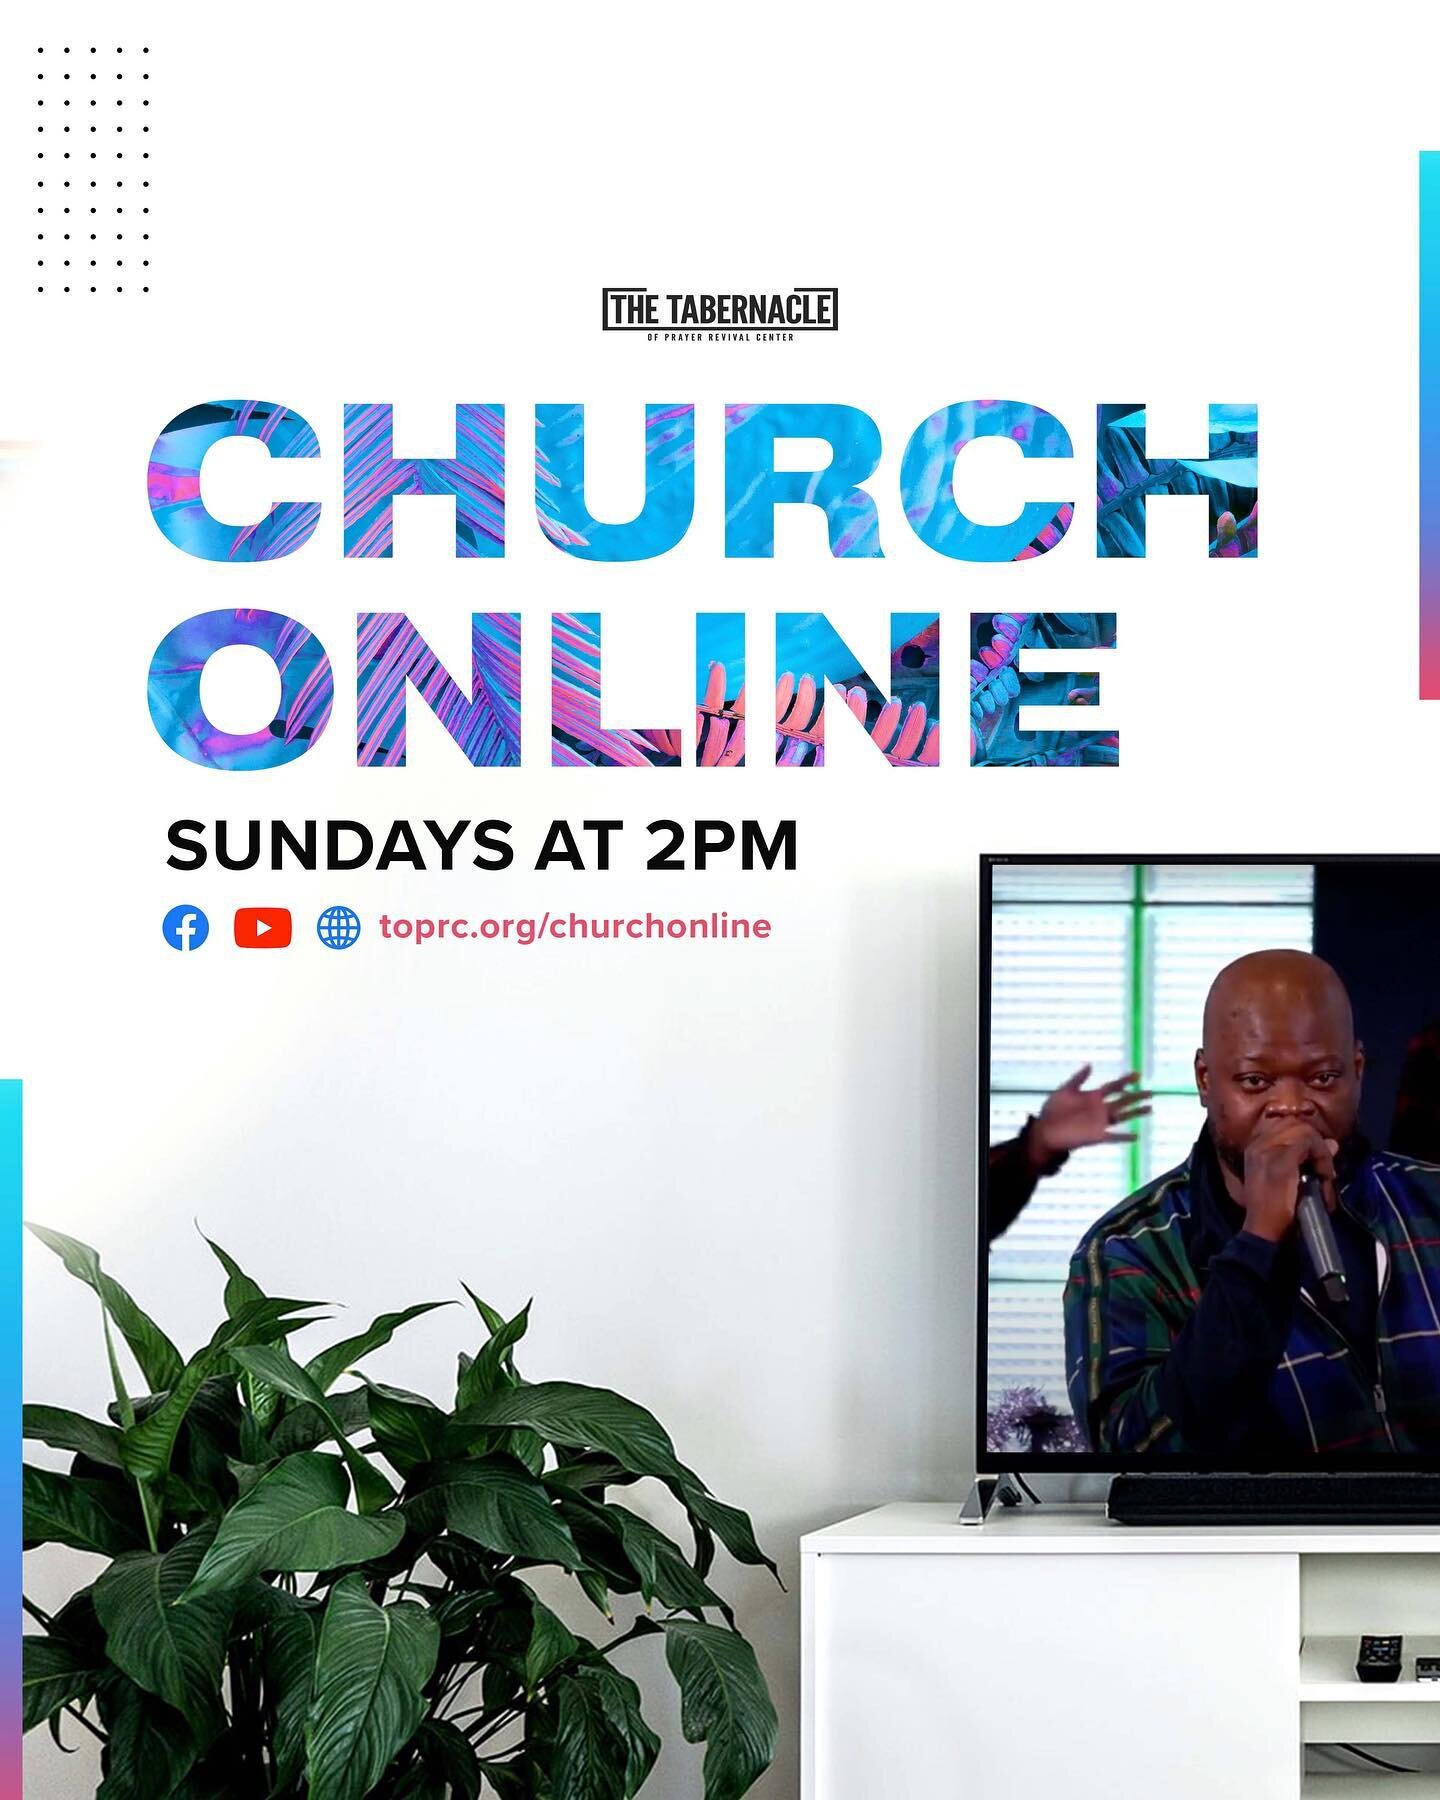 Join us for Church Online today at 2pm!

#thetabernacle #toprc #churchonline